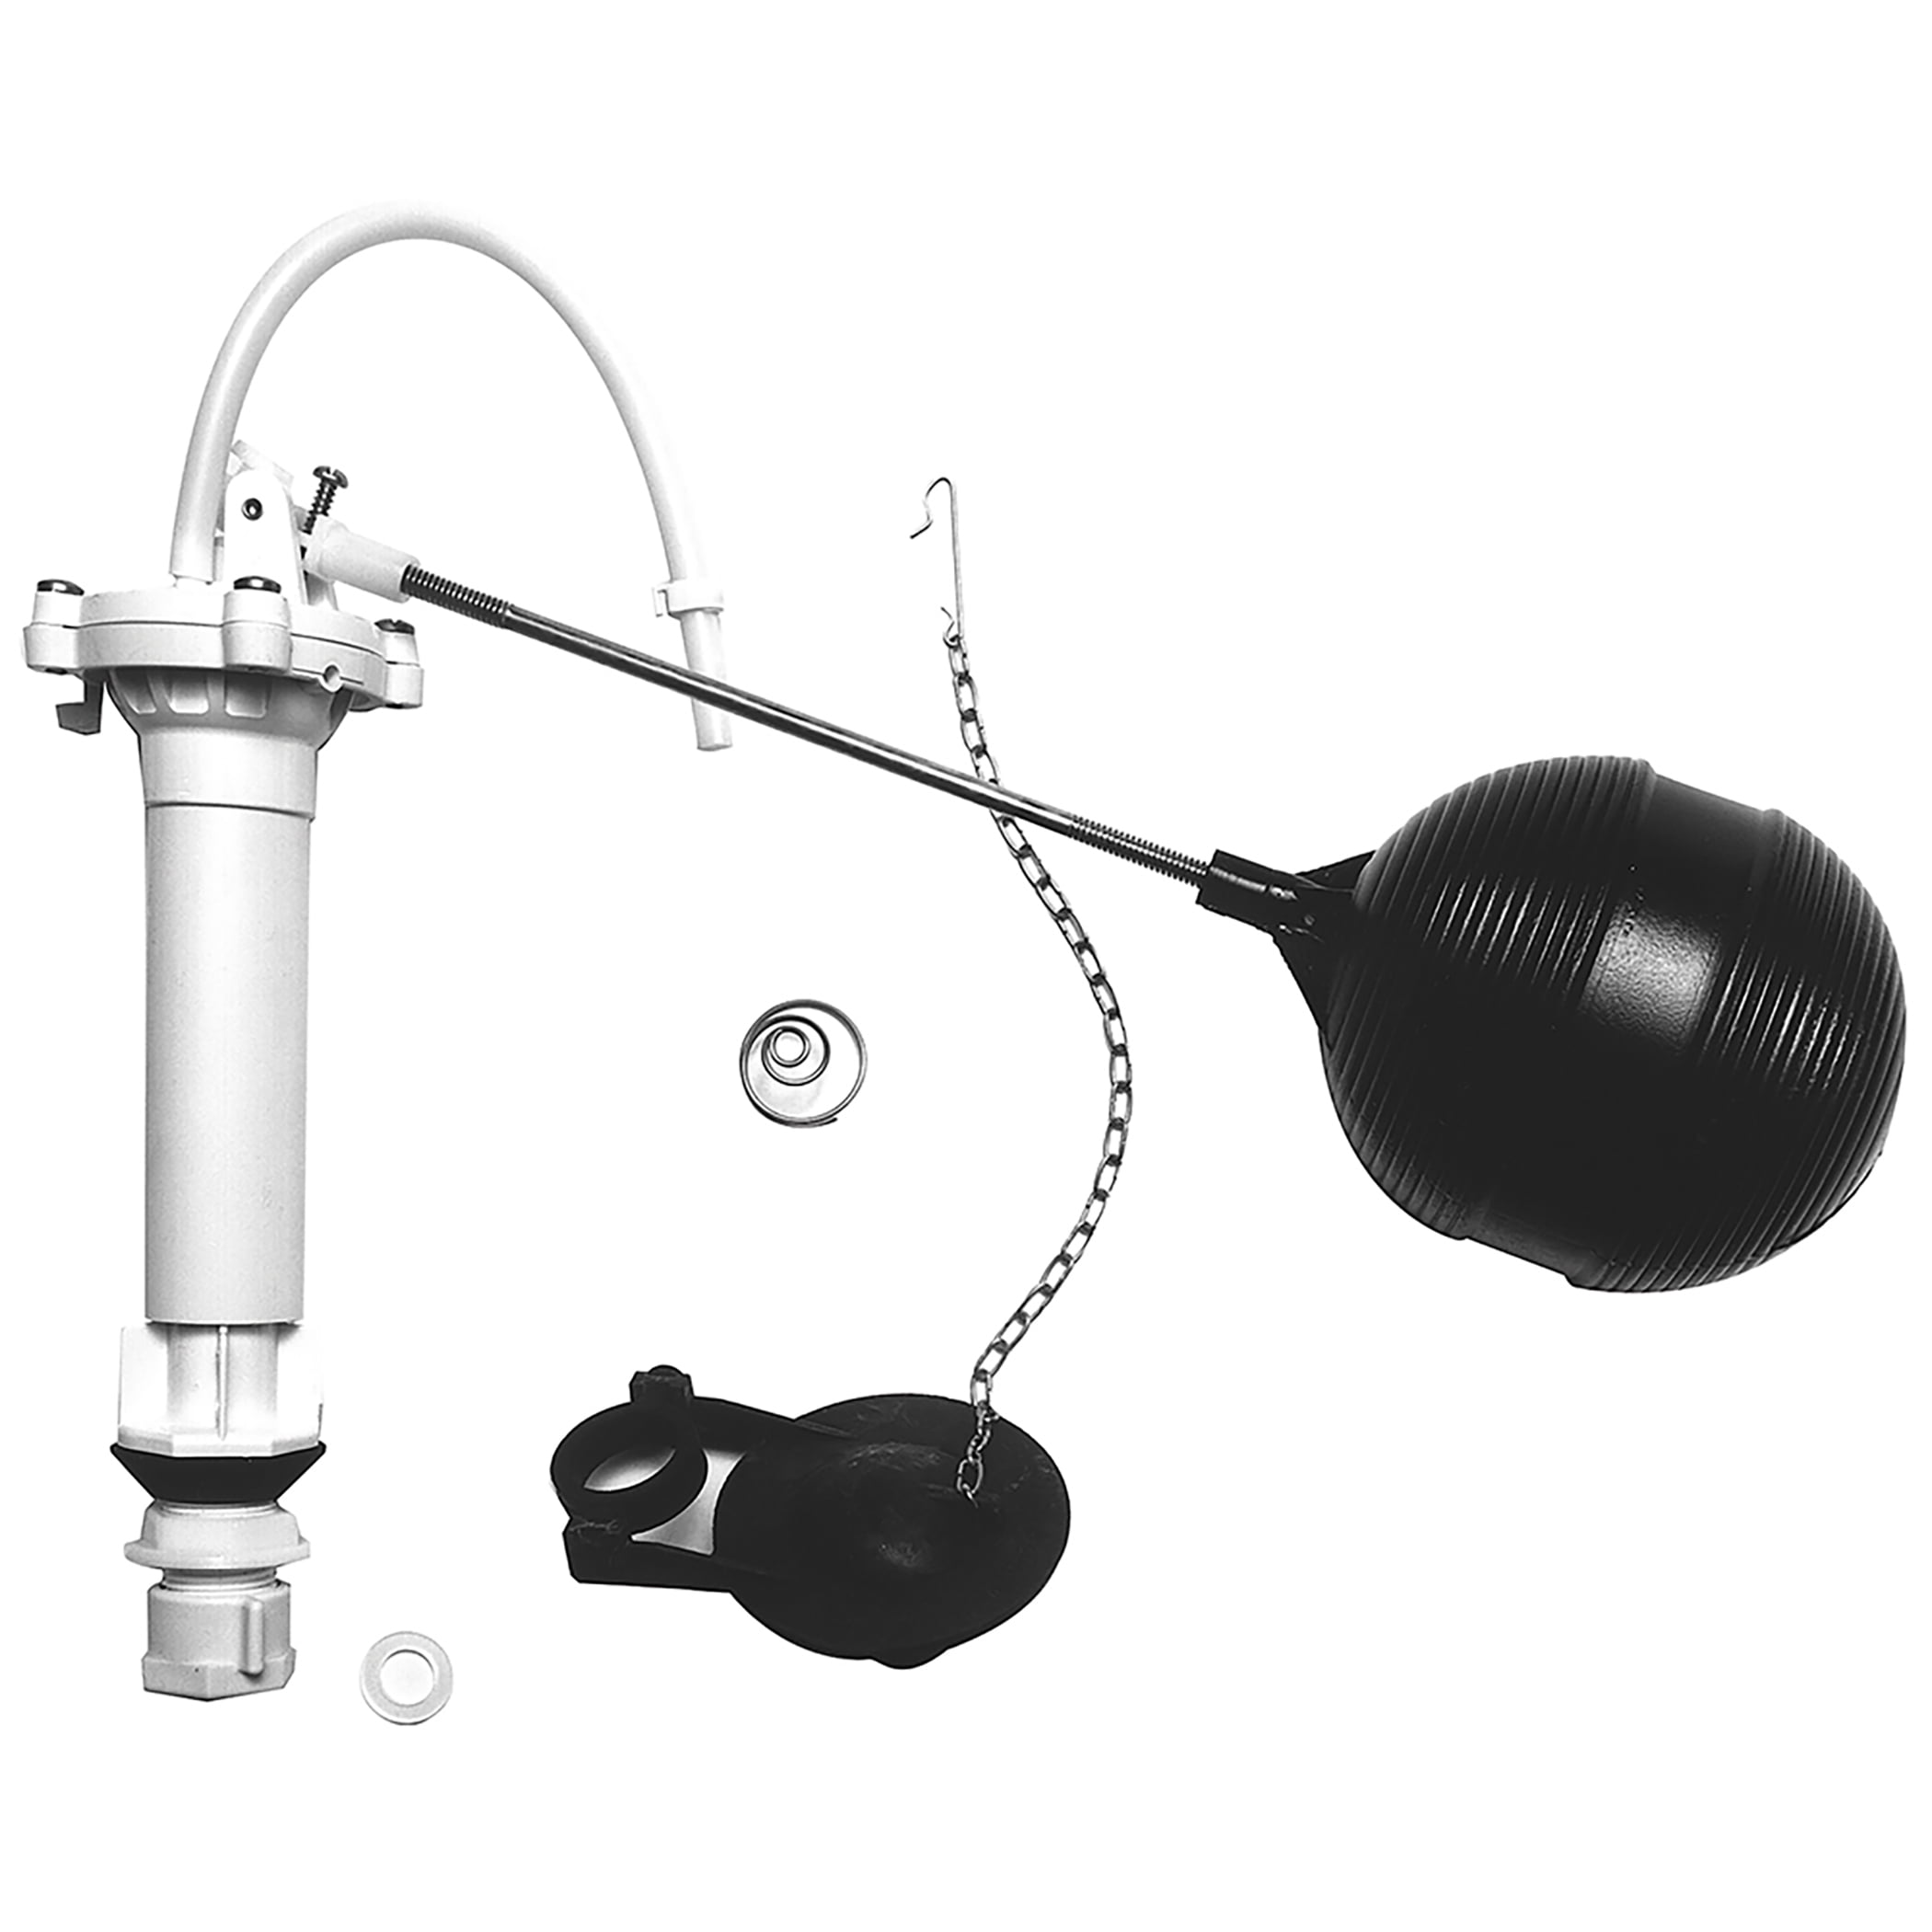 Details about   Universal Toilet Fill Valve and Flapper Repair Kit for 2-Inch Flush Valves 400CR